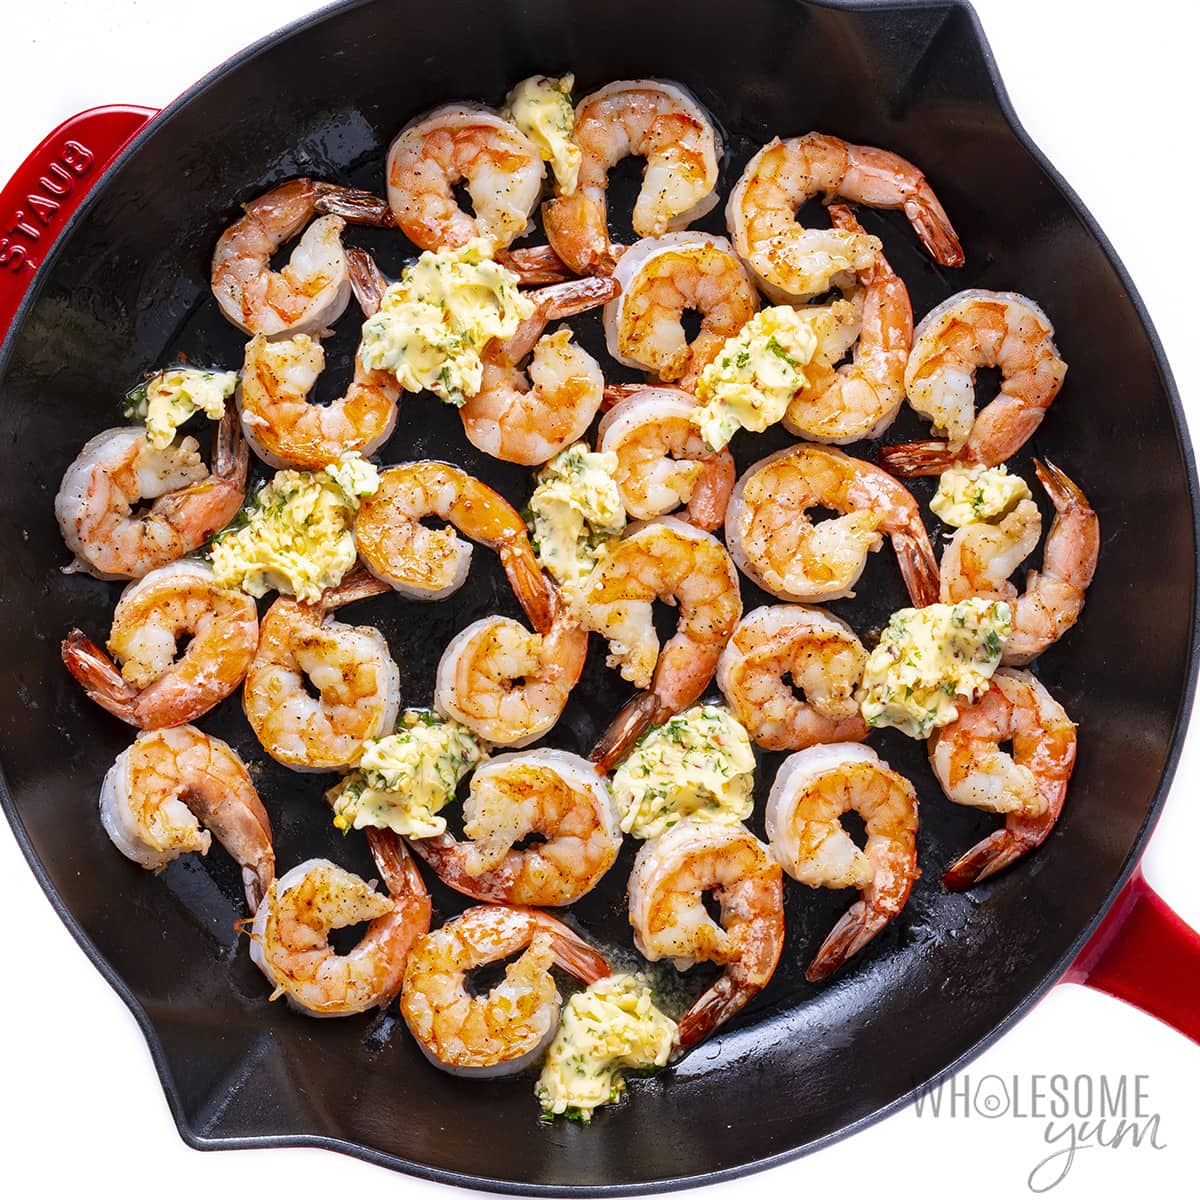 Cooked shrimp with garlic butter melting around it.